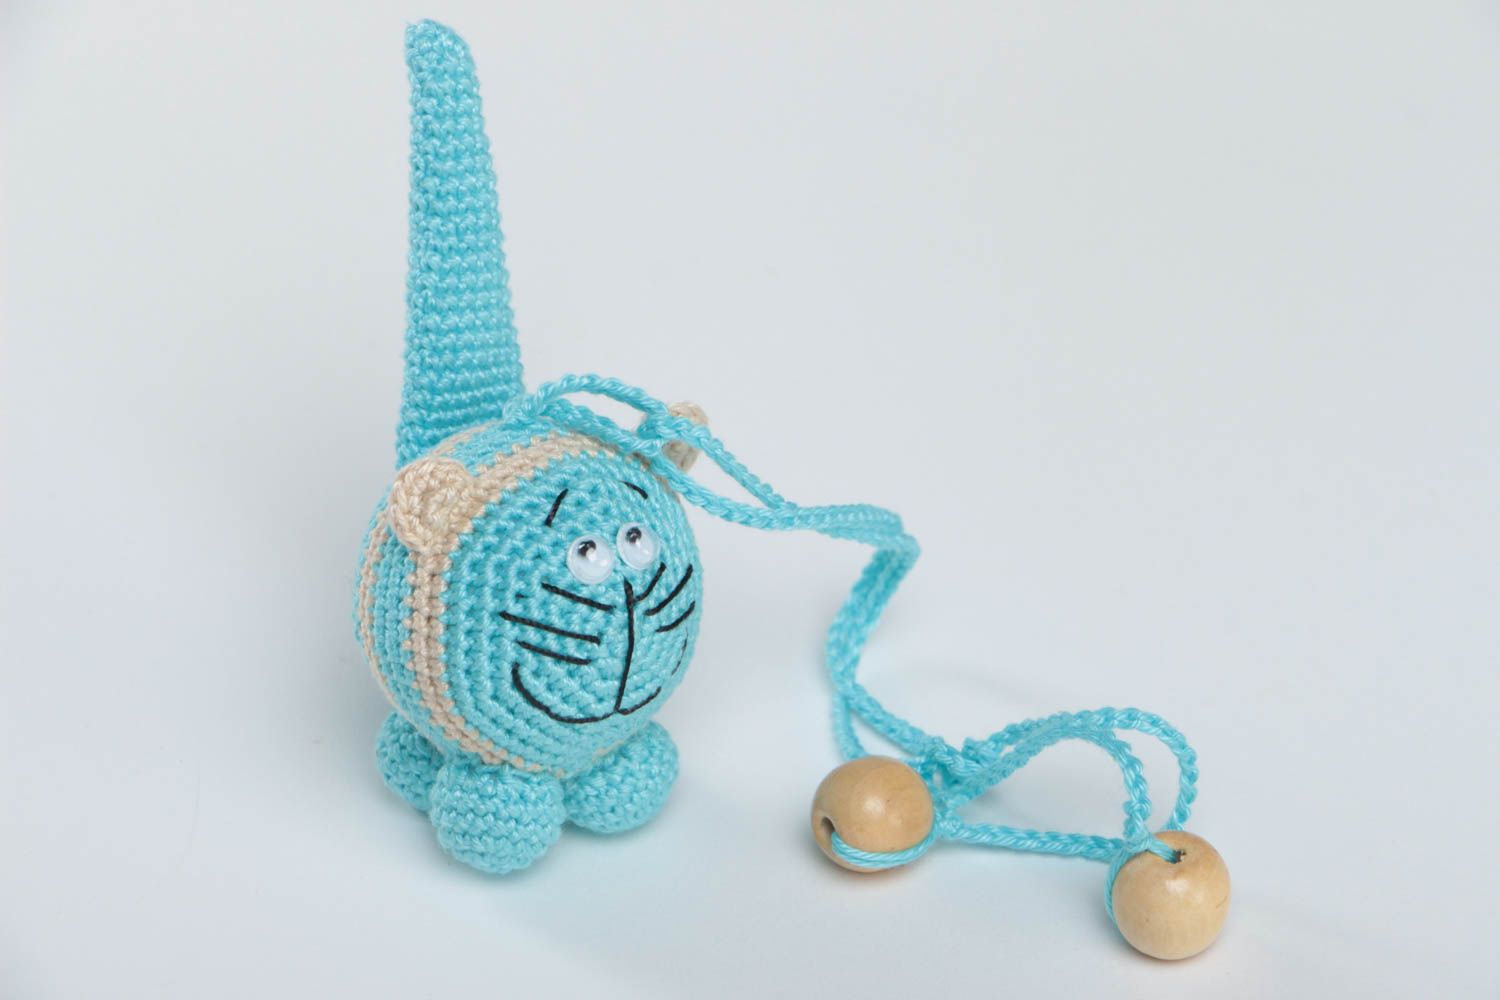 Crocheted cotton rattle small blue cat handmade toy for little children photo 2